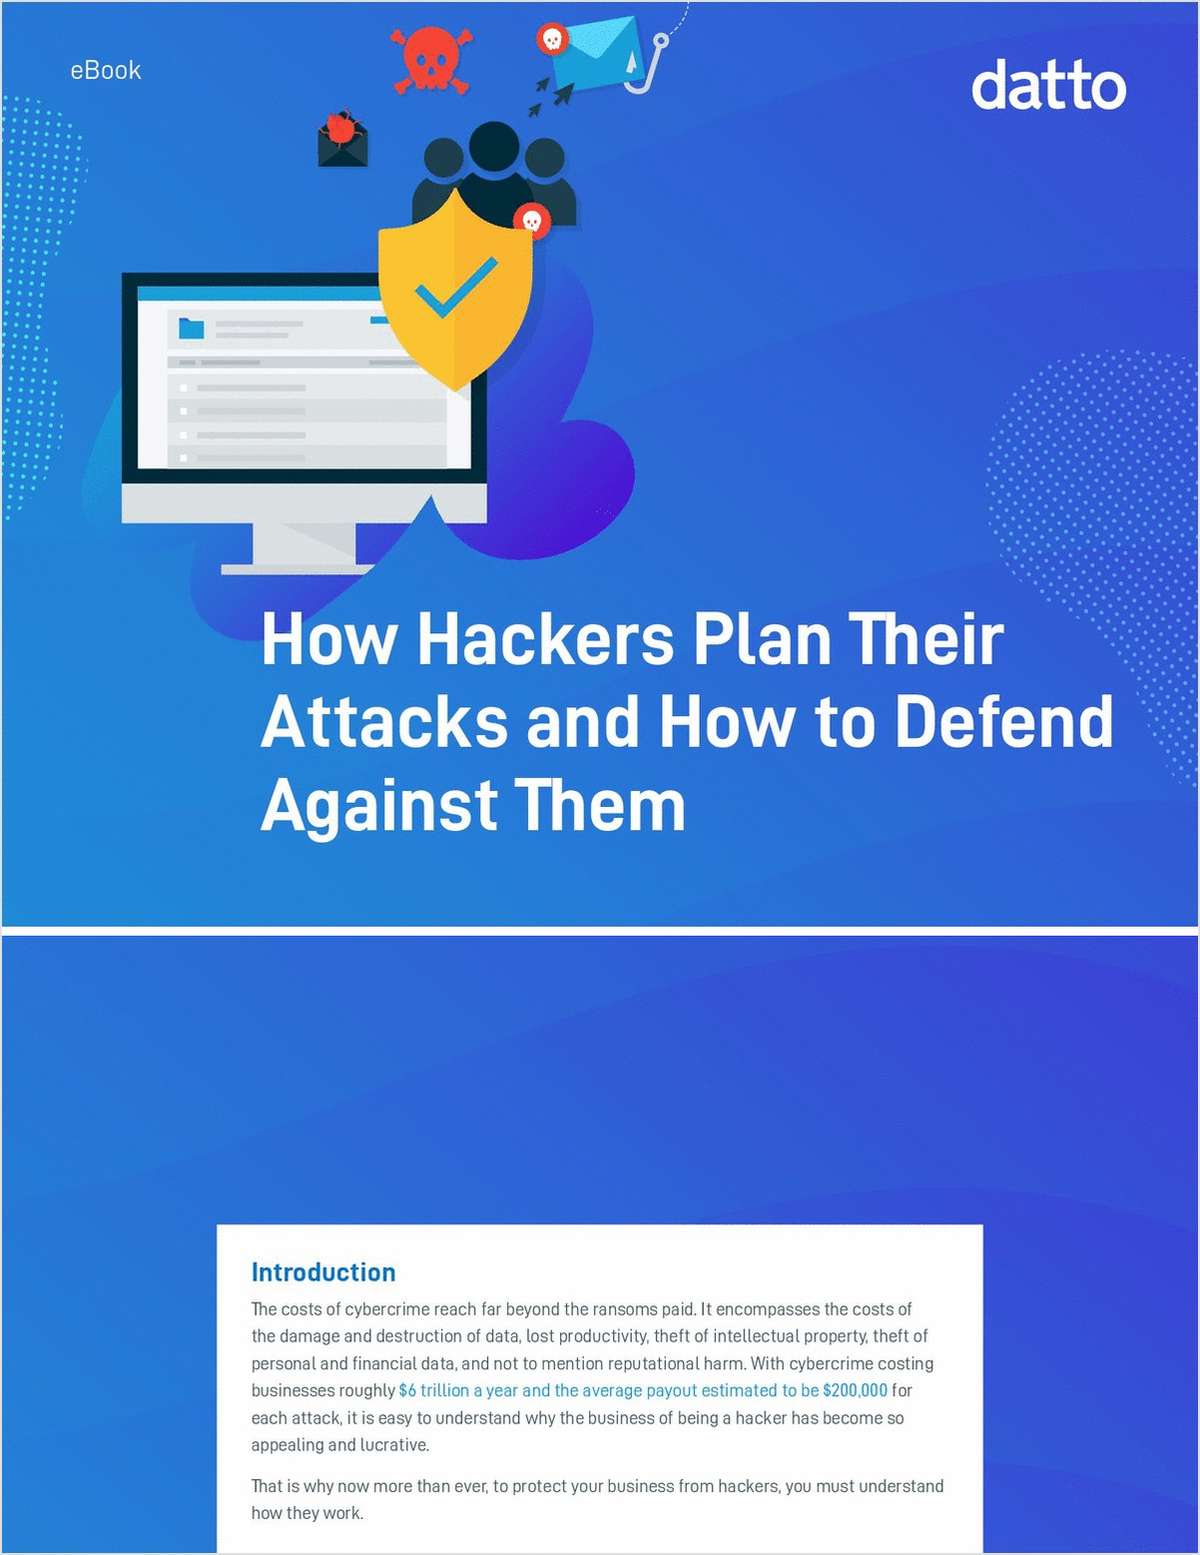 How Hackers Plan Their Attacks and How to Defend Against Them